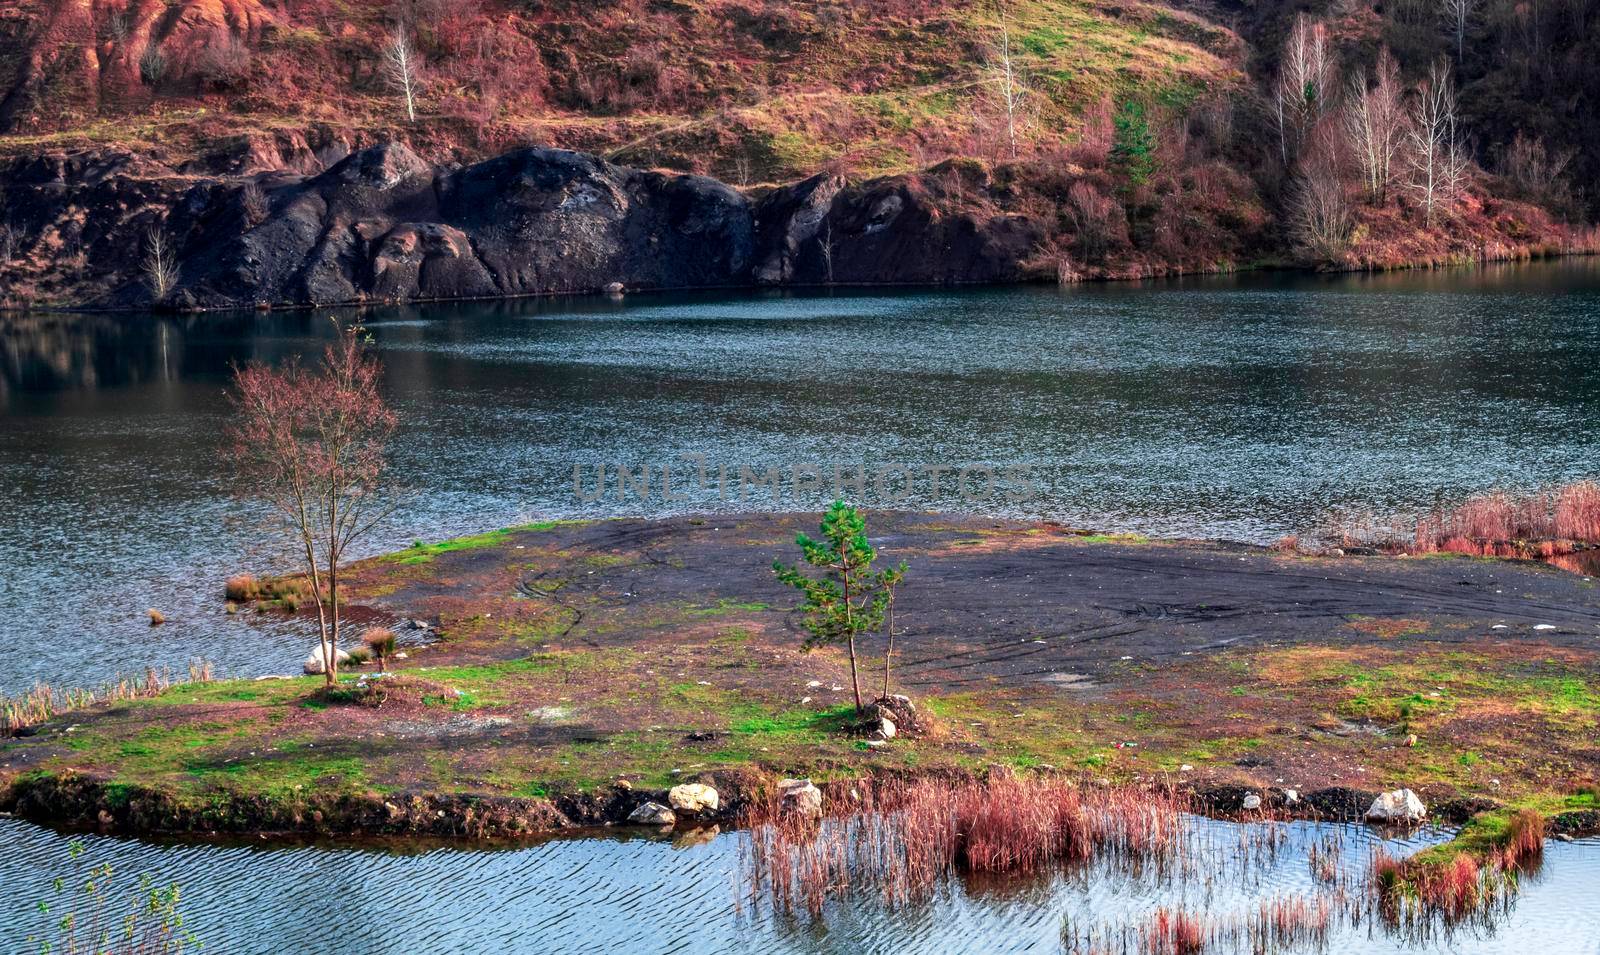 A small islet on a coal lake